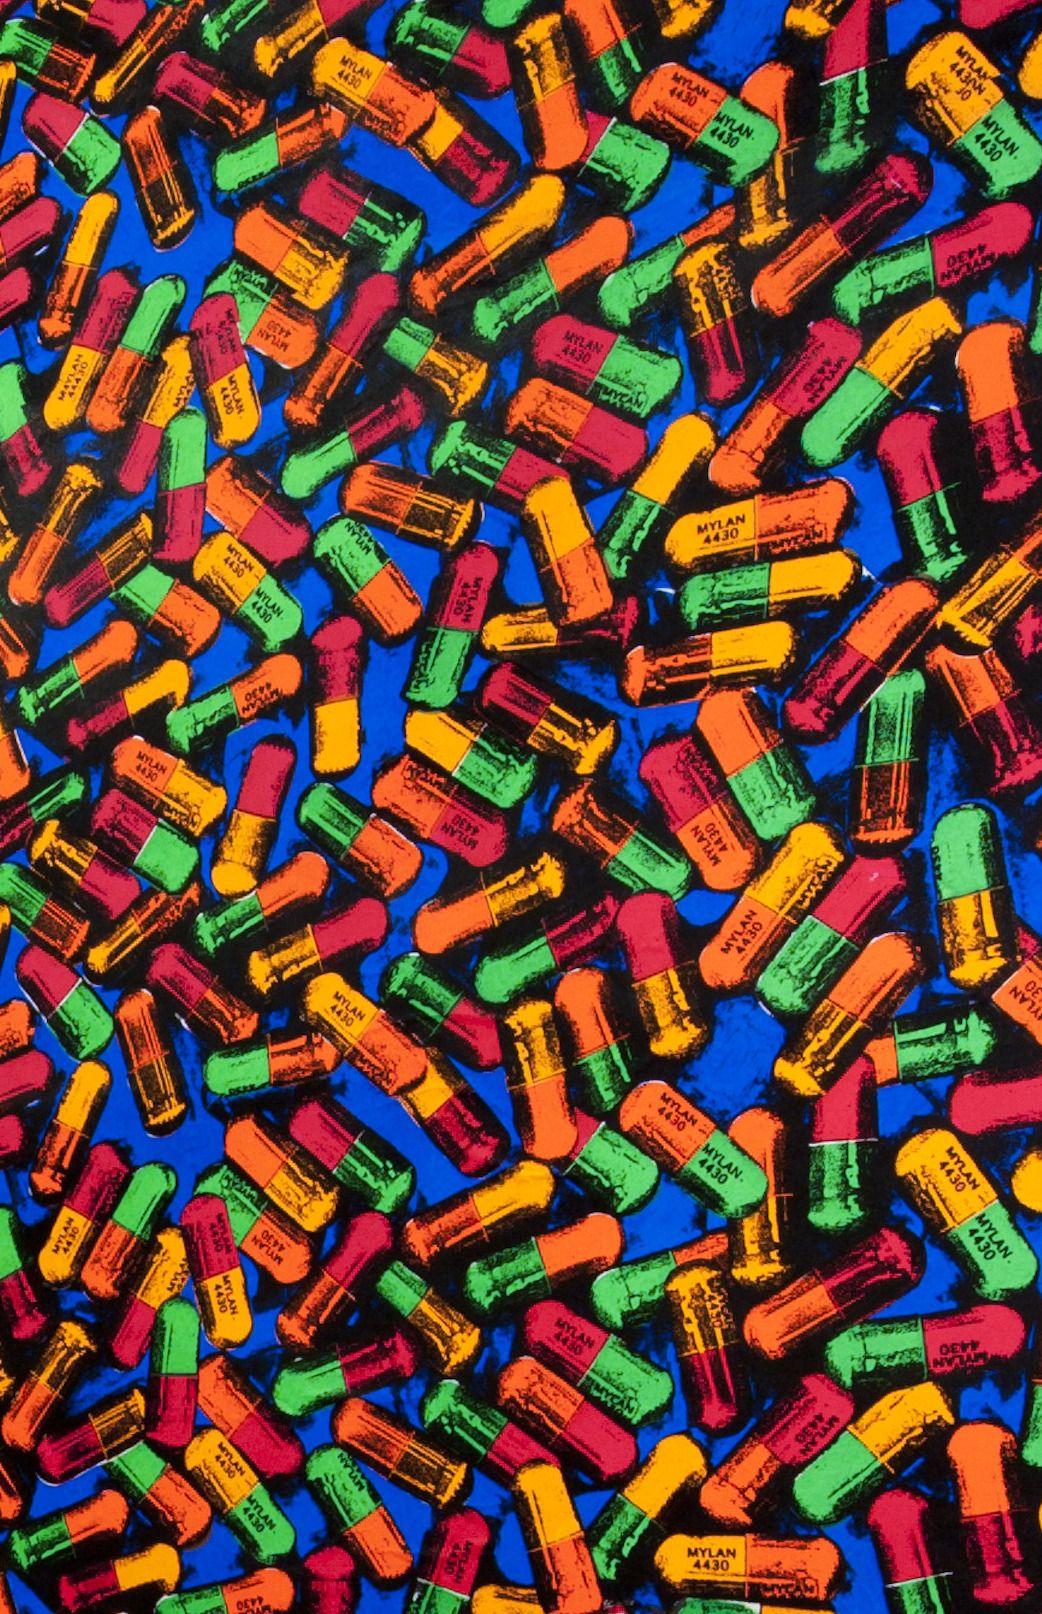 A close up of the painting with many colored pills - 